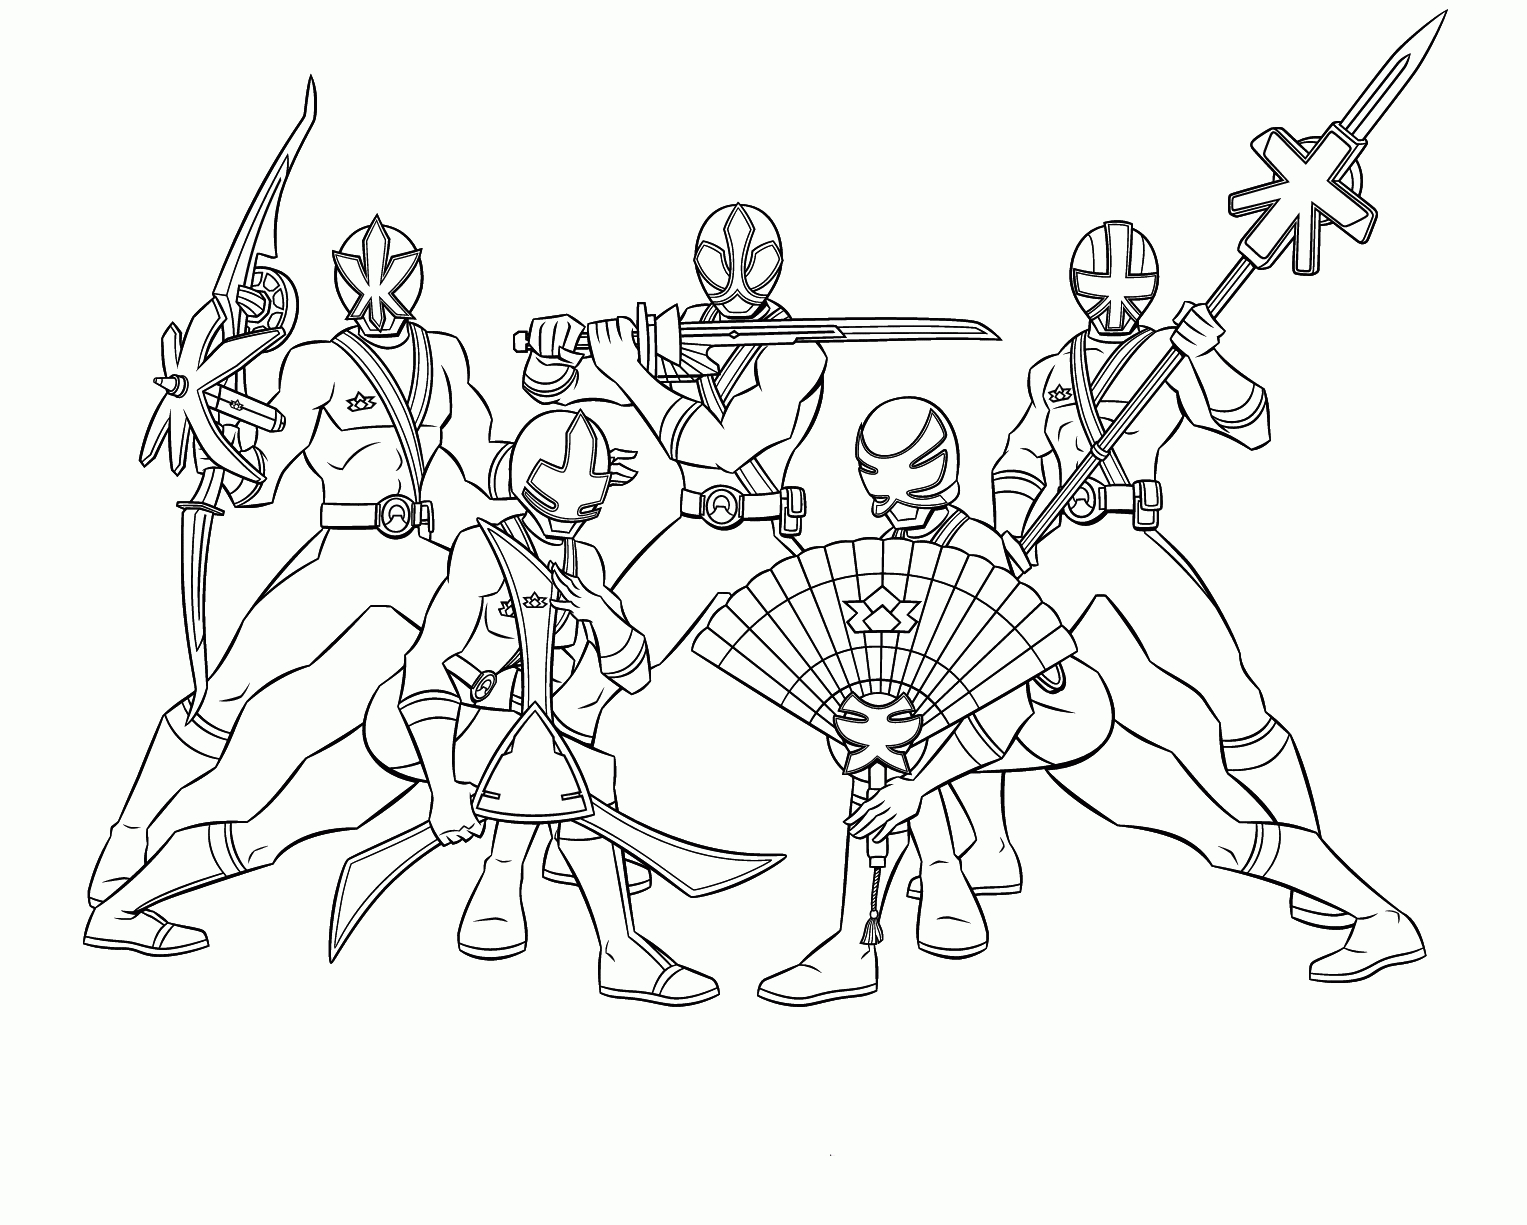 Coloring Pages Of Power Rangers Jungle Fury - Coloring Home concernant Power Rangers Coloring Pages